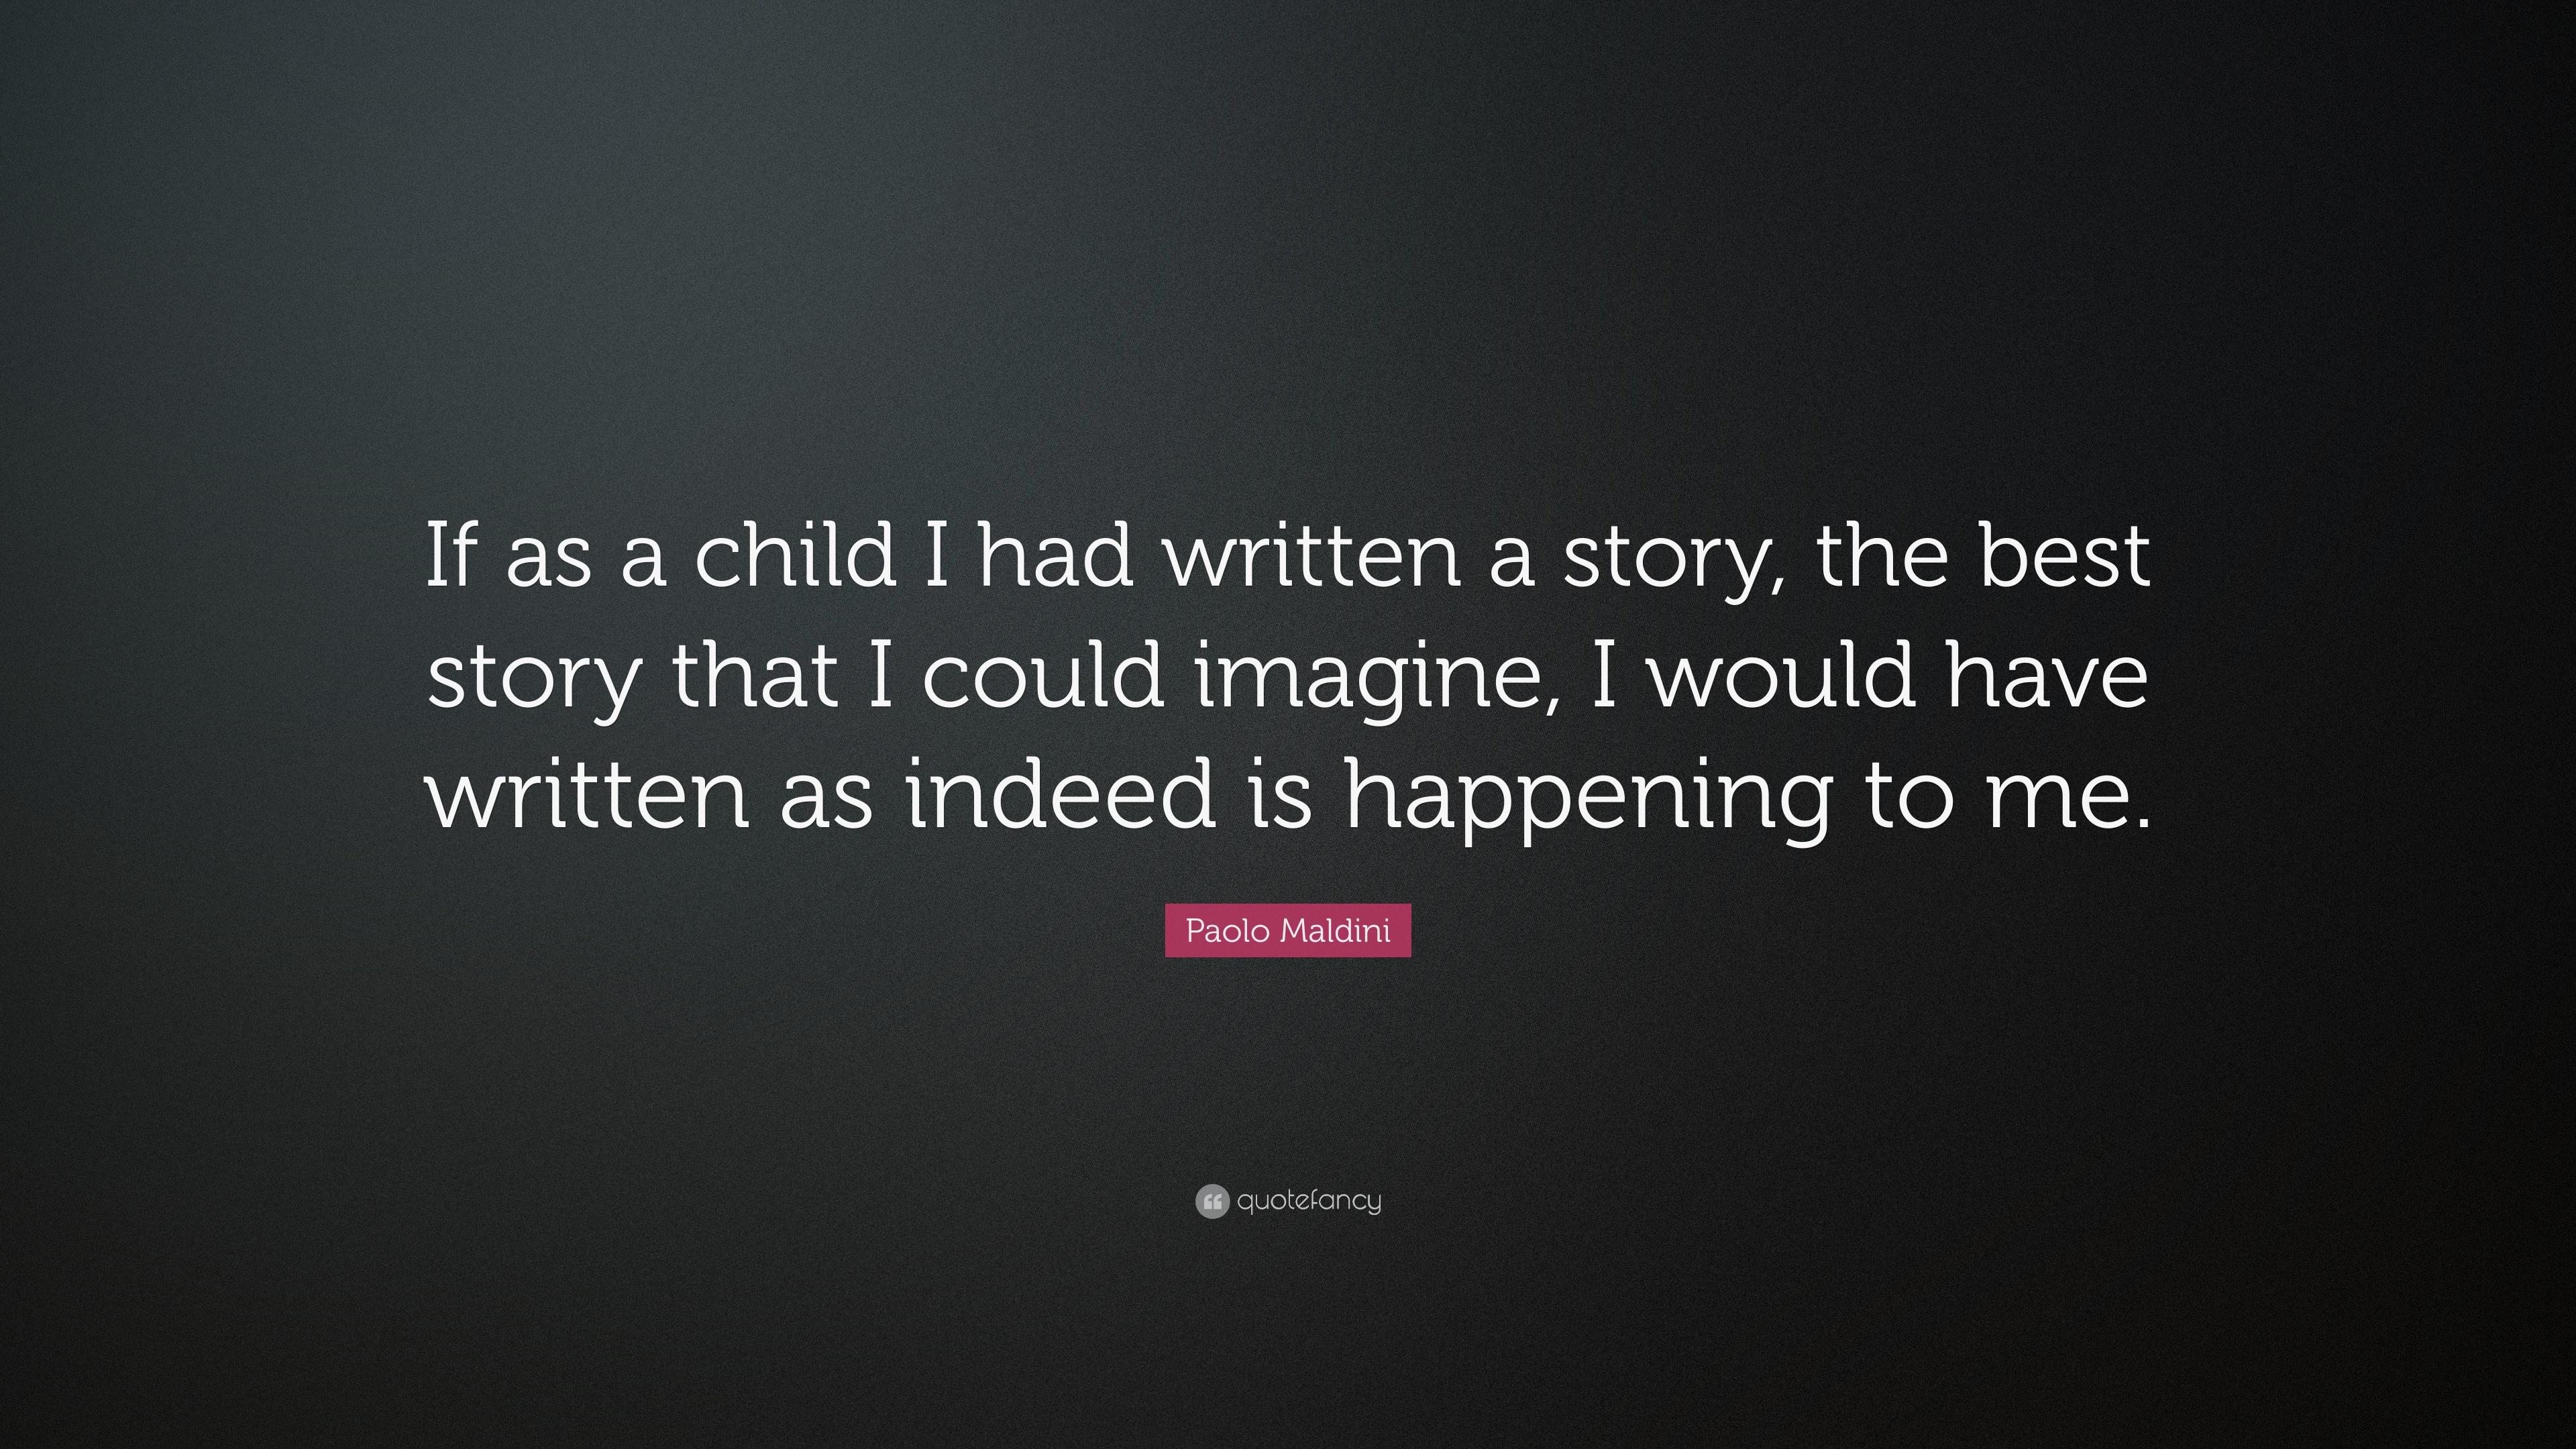 Paolo Maldini Quote: “If as a child I had written a story, the best